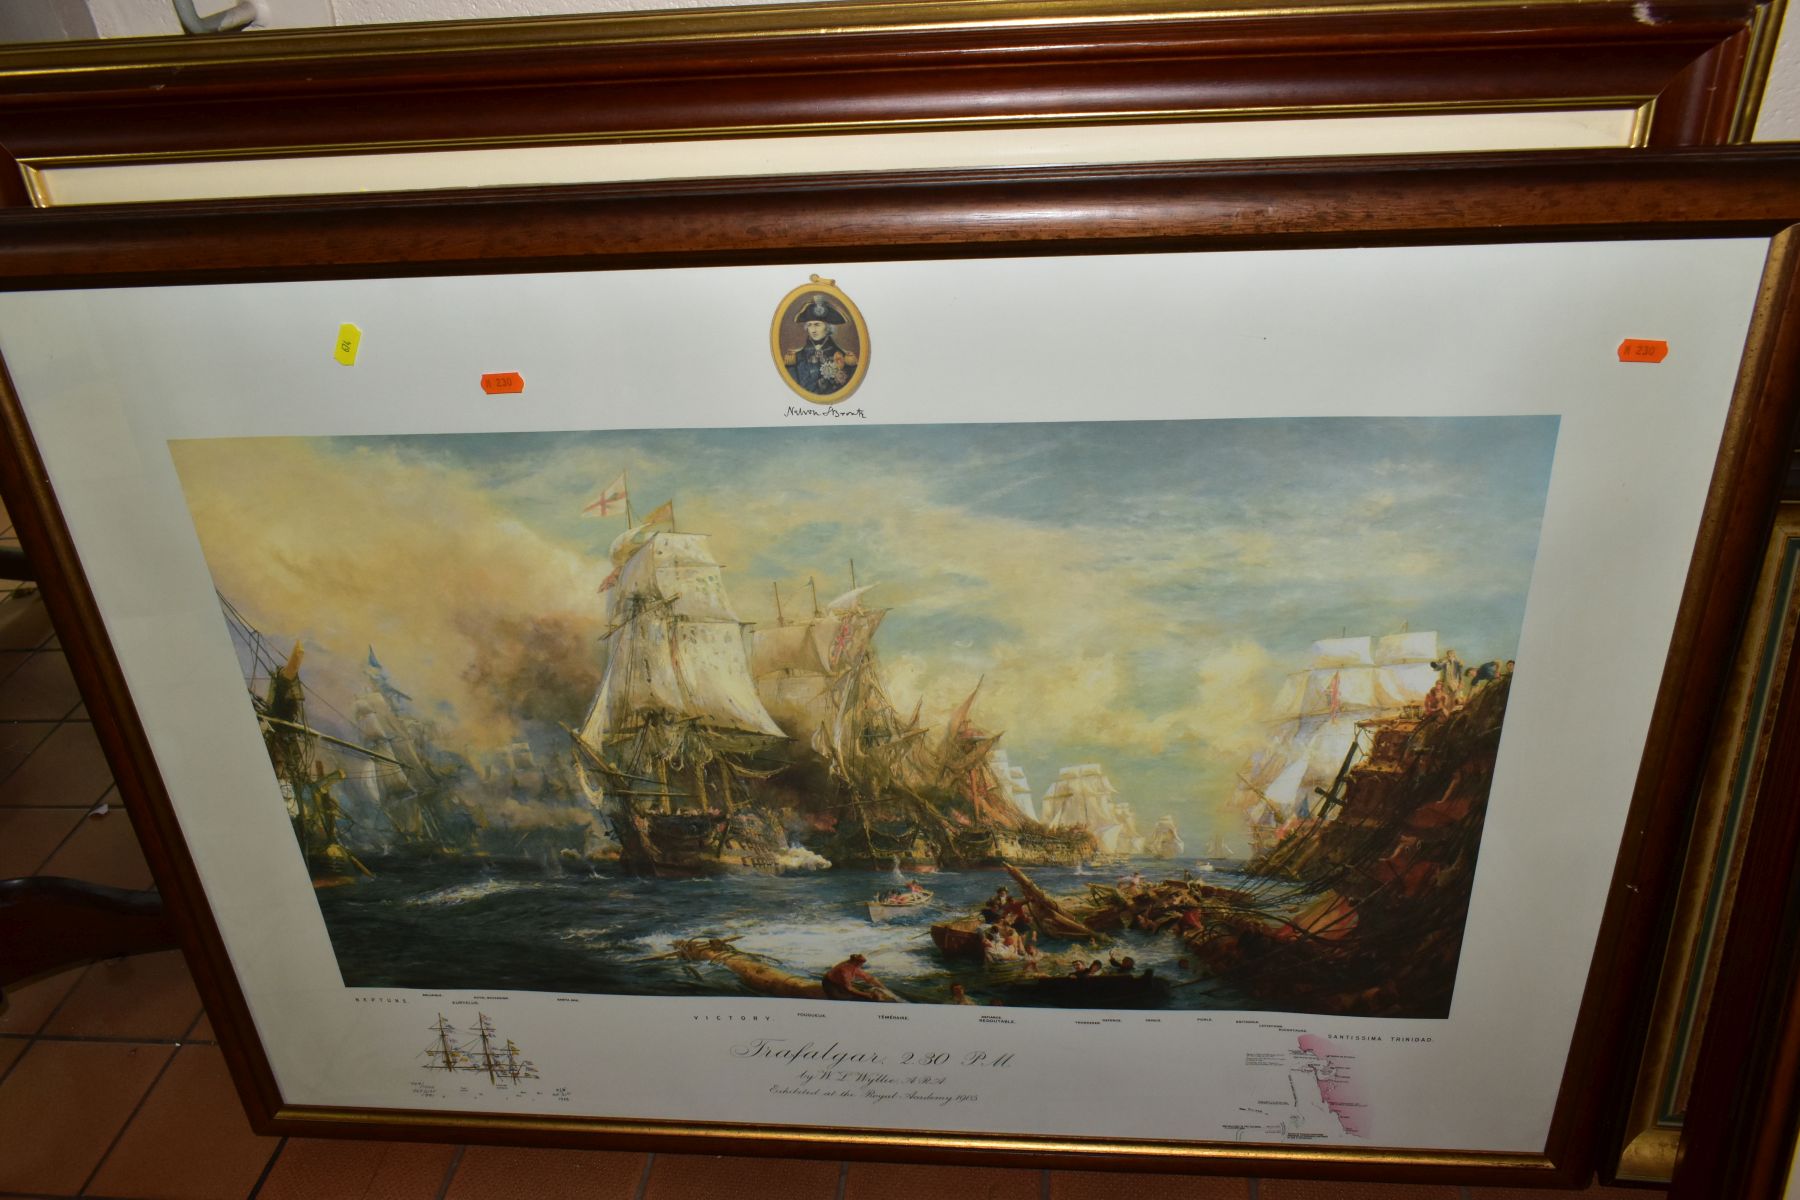 PICTURES AND PRINTS ETC, to include maritime prints - signed Steven Dews 'The Tweed in the Channel - Image 4 of 10